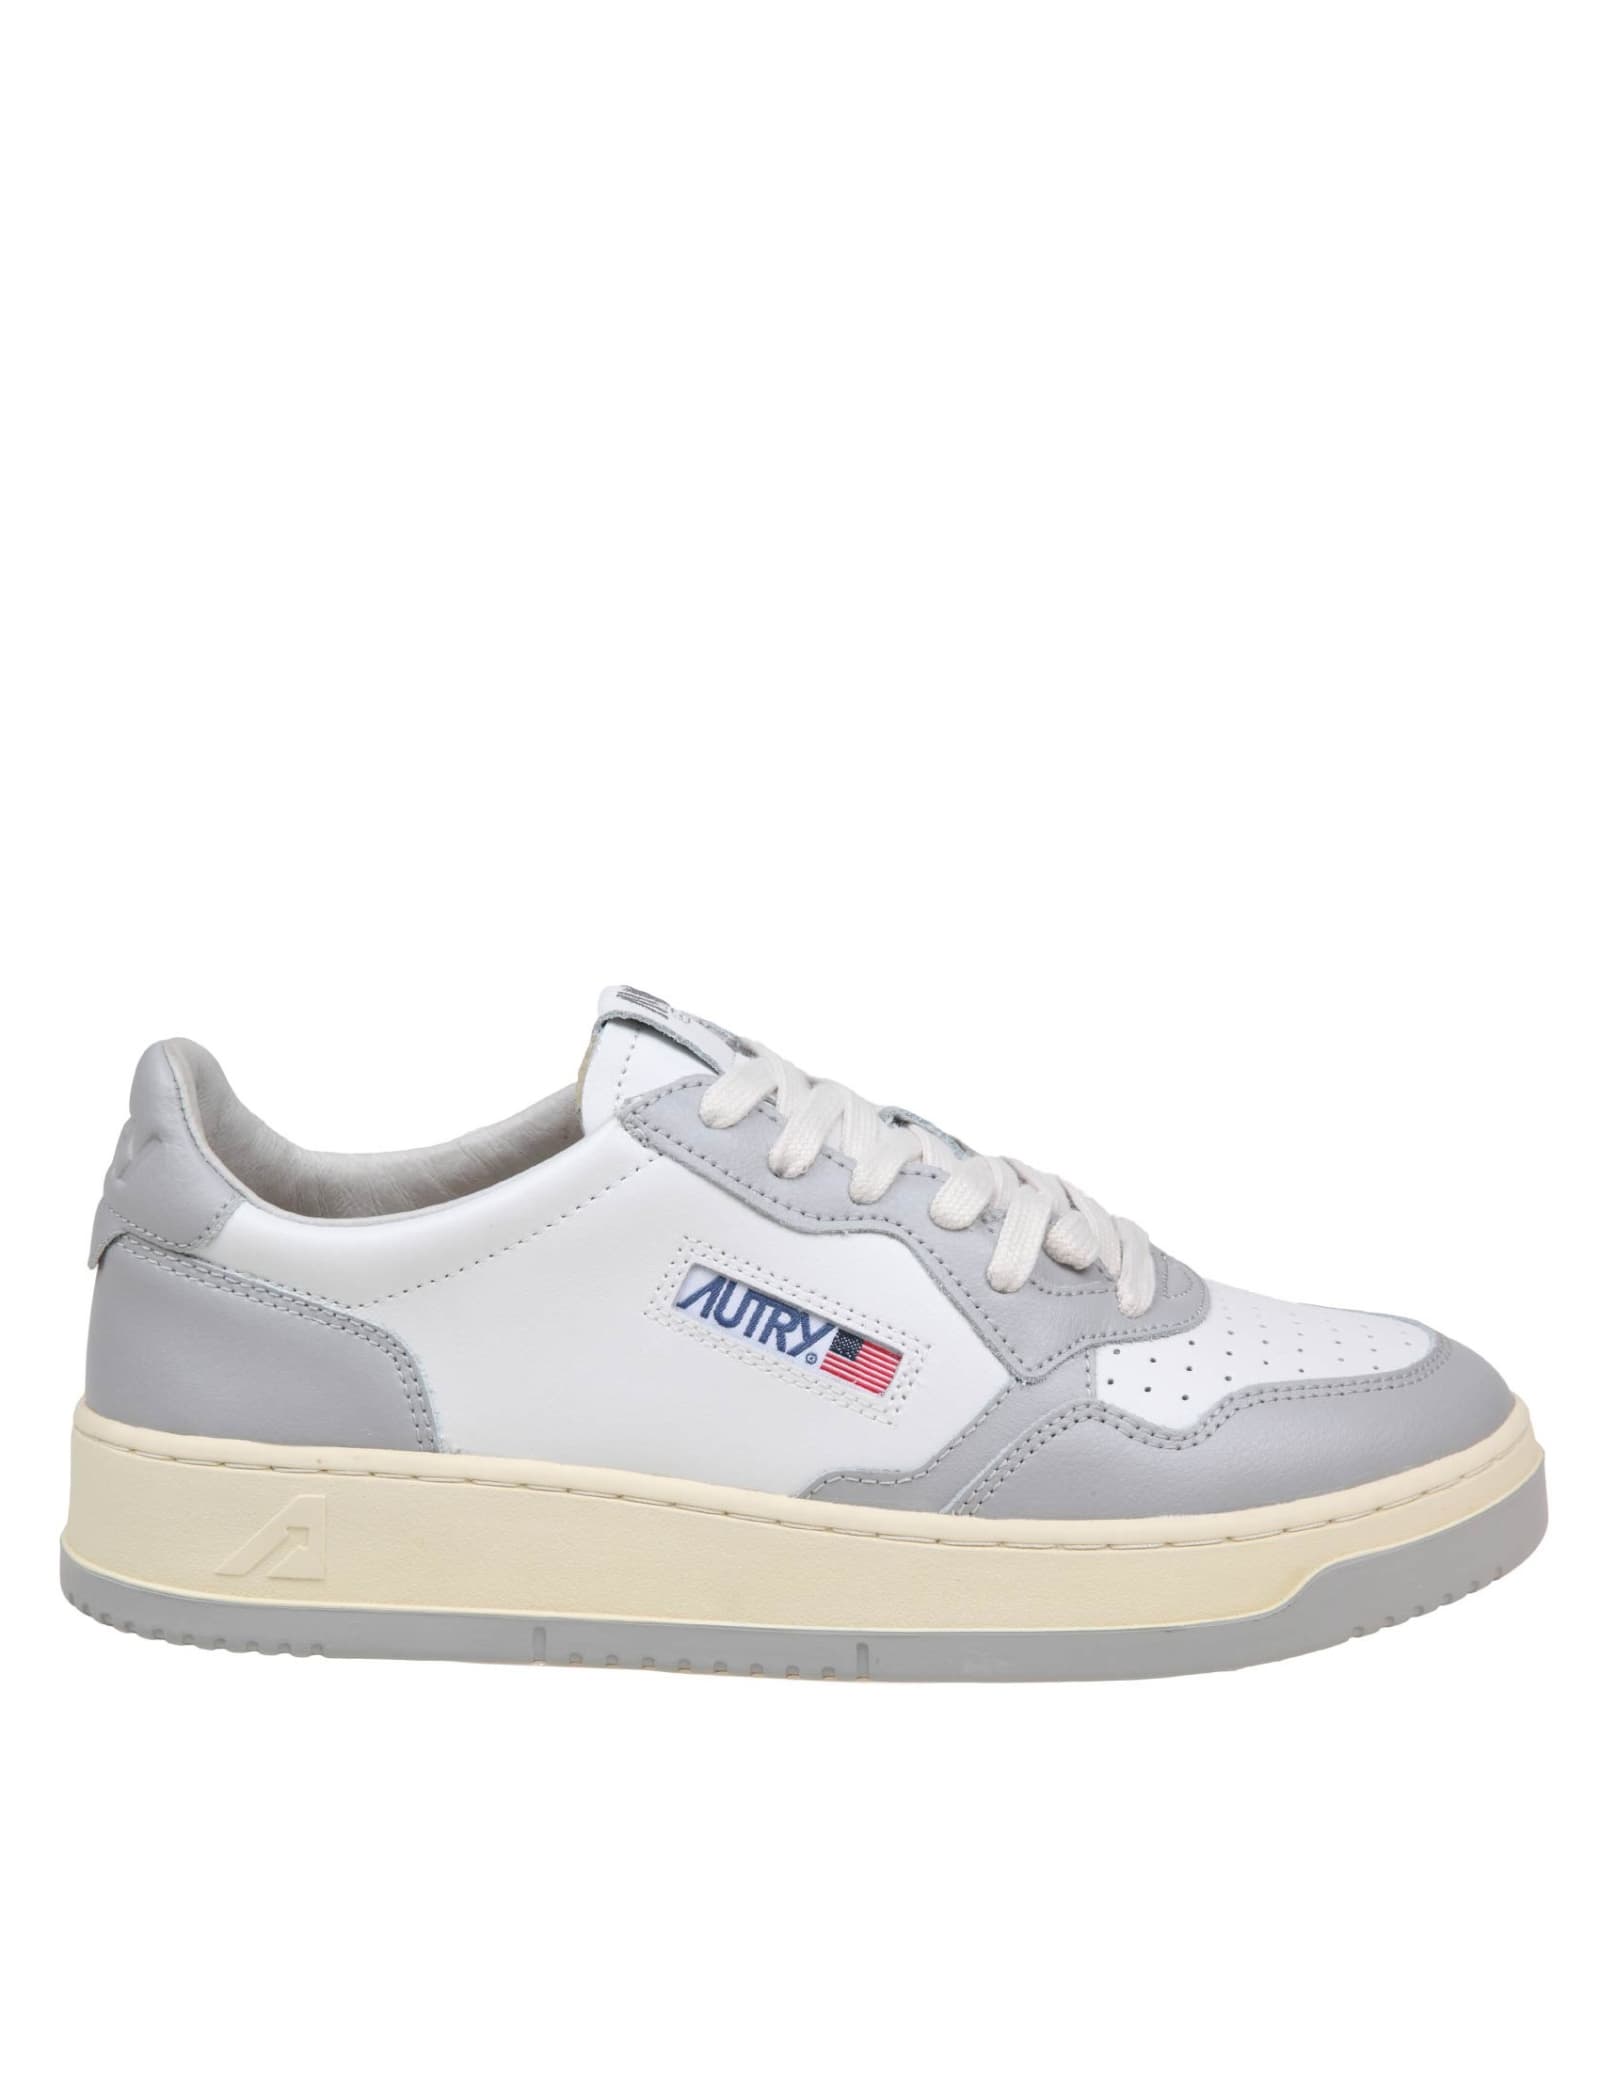 Shop Autry Sneakers In White And Gray Leather